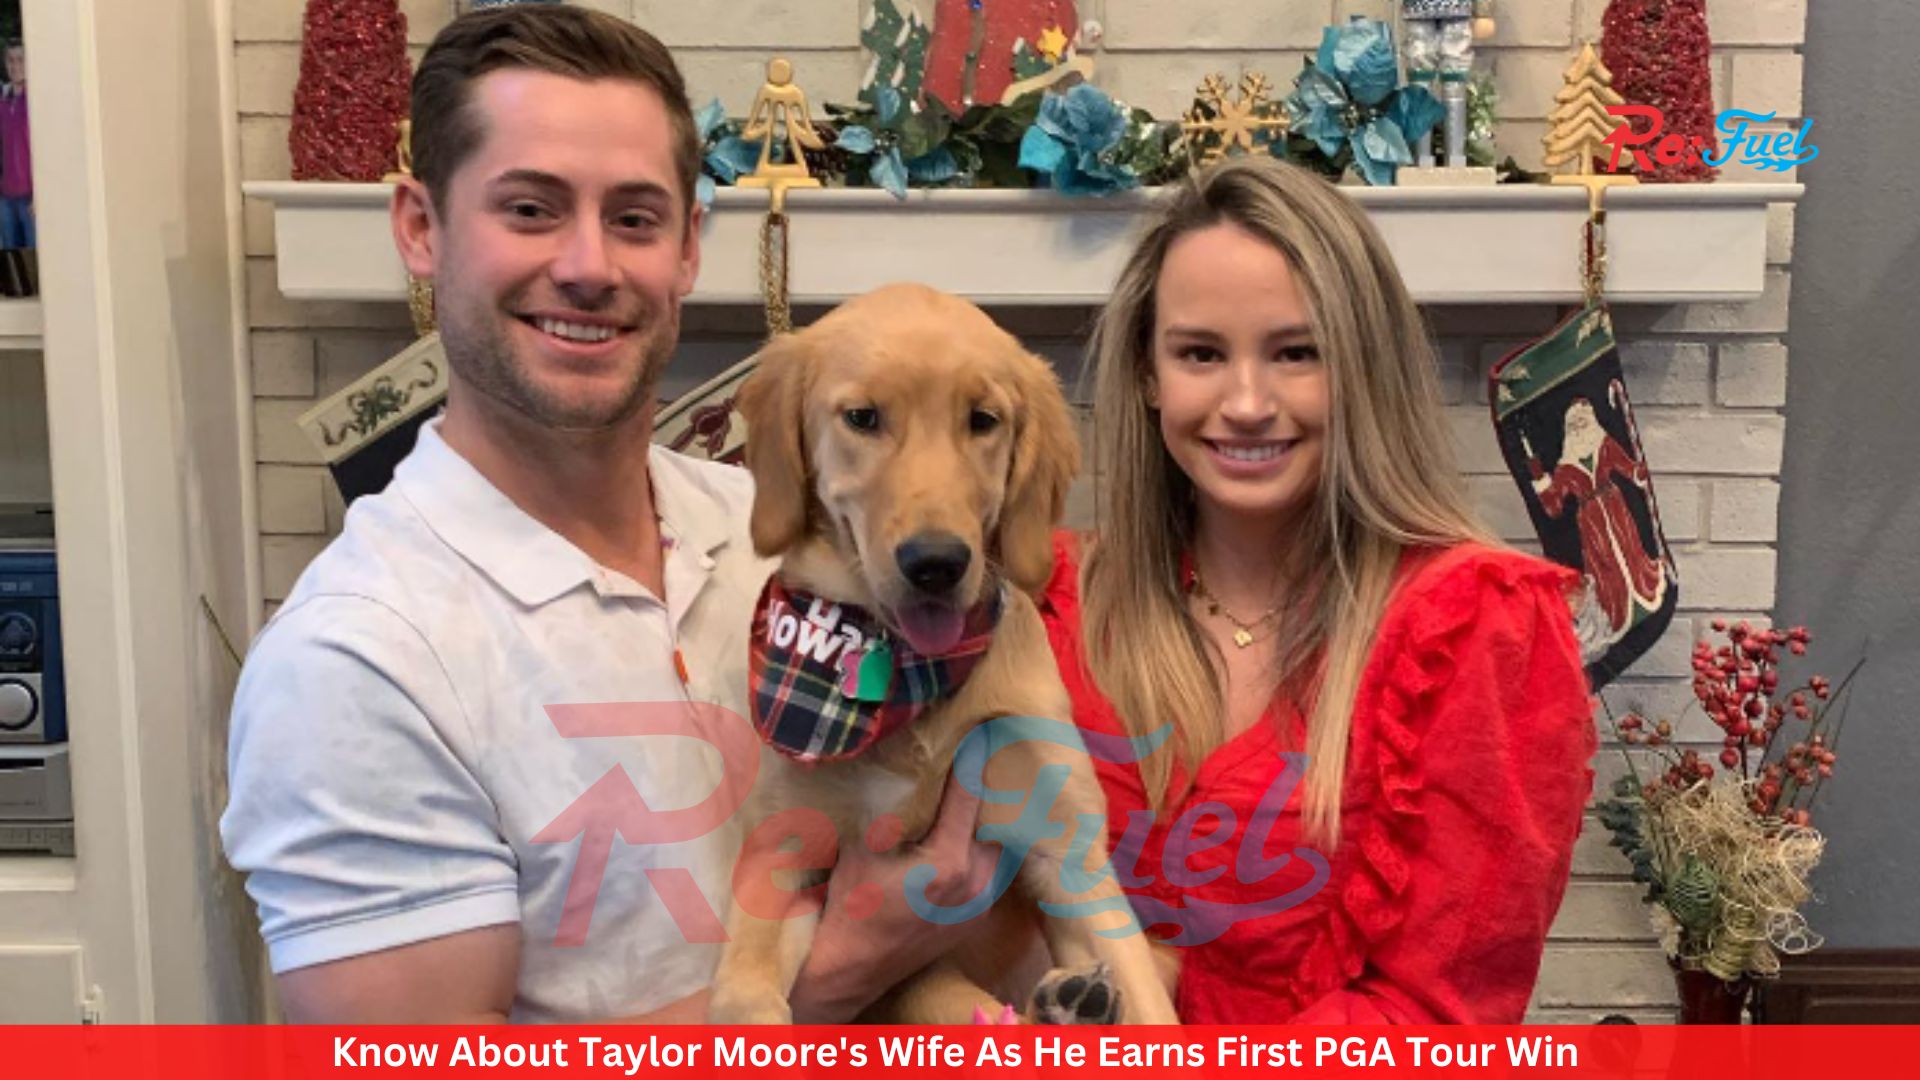 Know About Taylor Moore's Wife As He Earns First PGA Tour Win